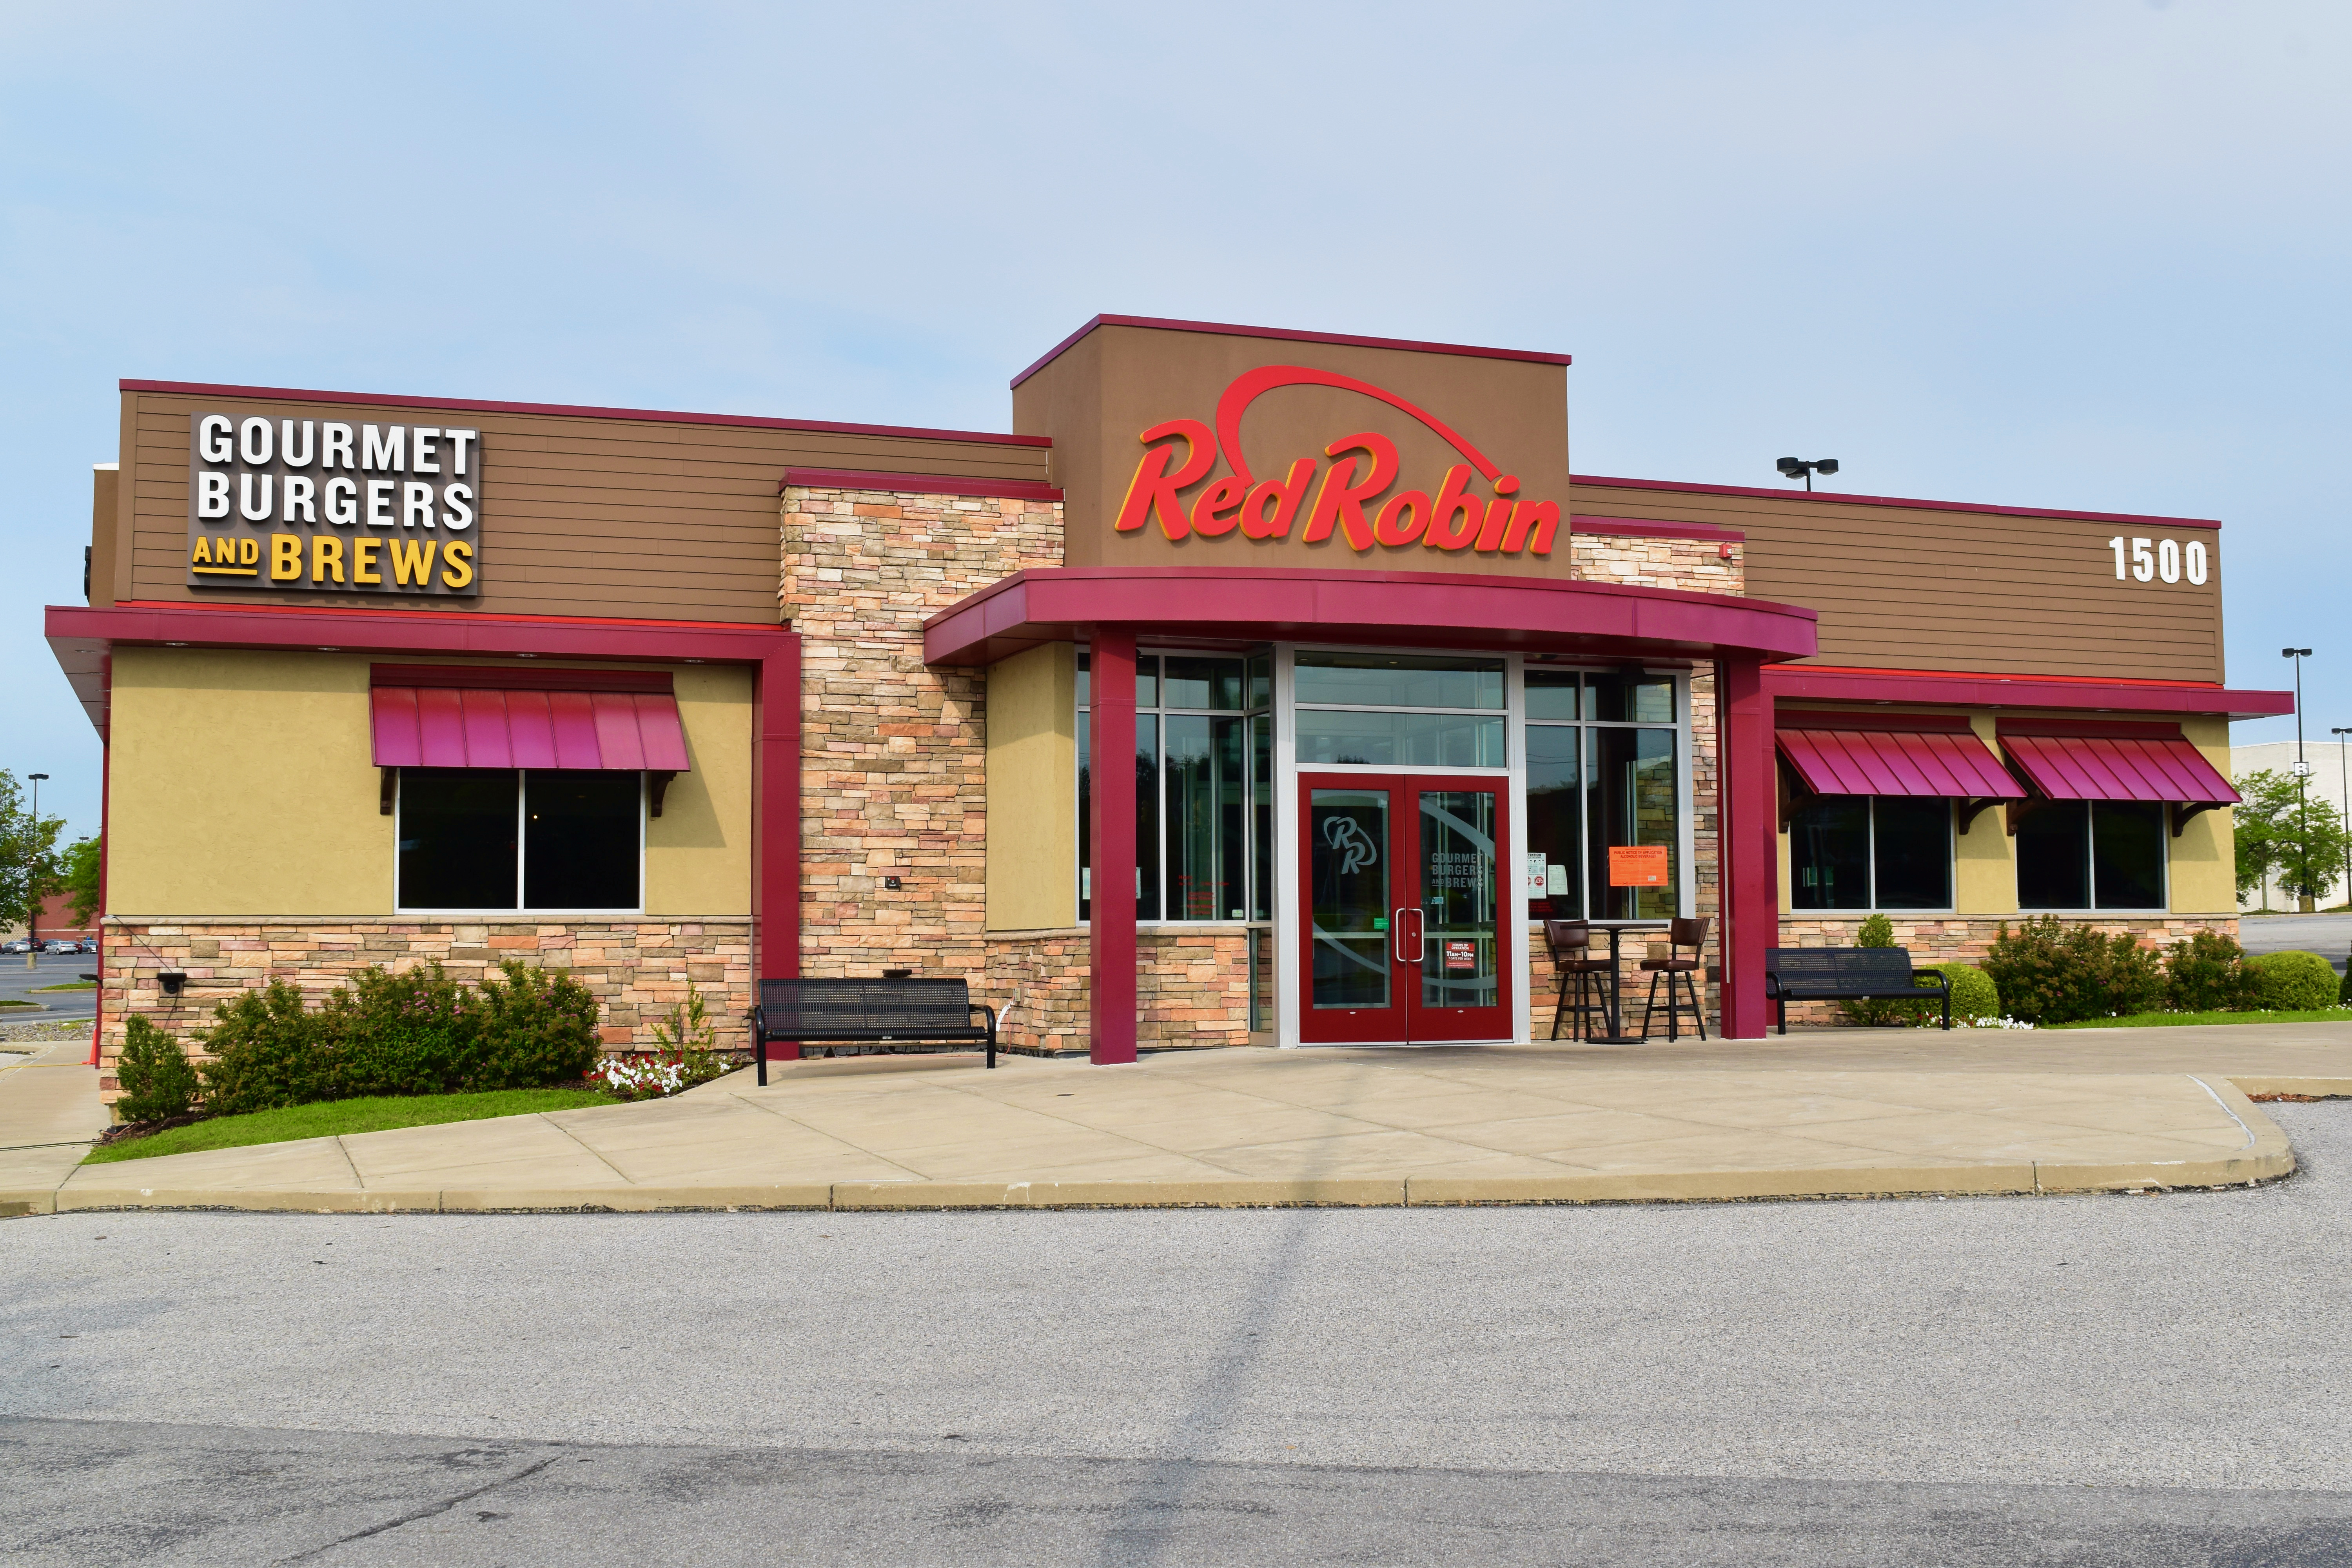 Exterior of the Red Robin Restaurant in York, PA